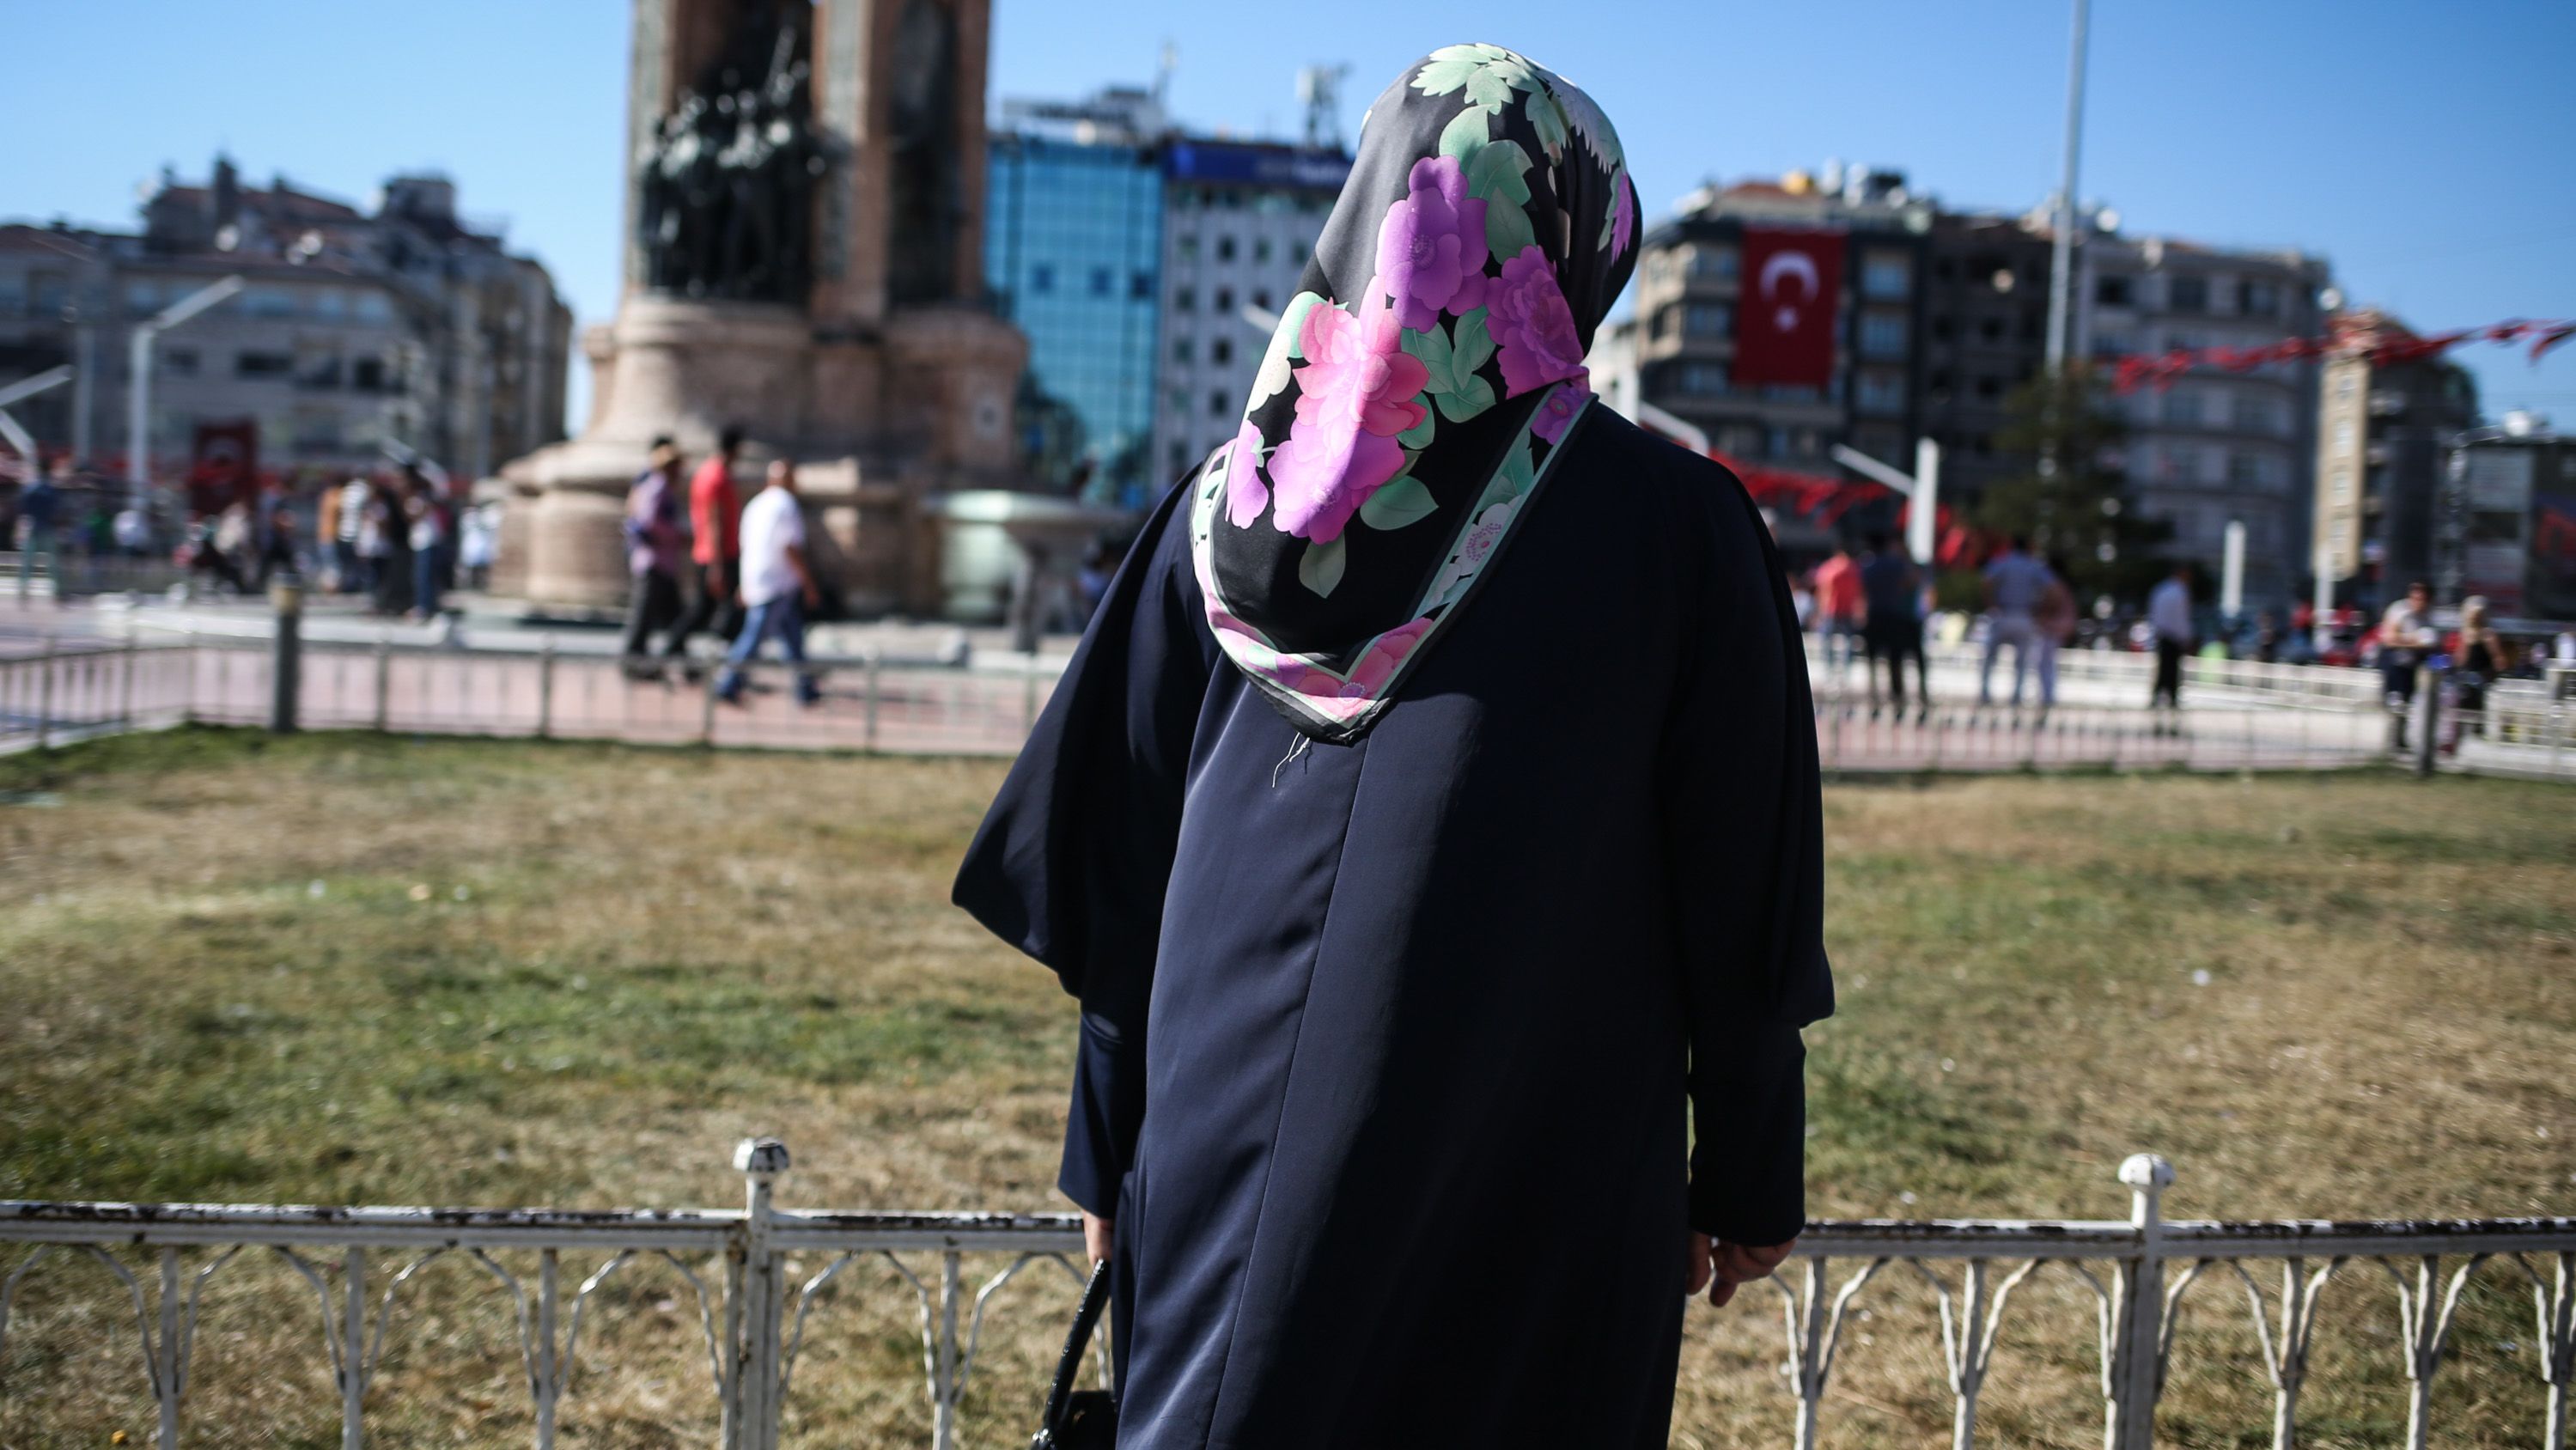 Serap, a housewife, poses for a photo in Taksim Square, in Istanbul.